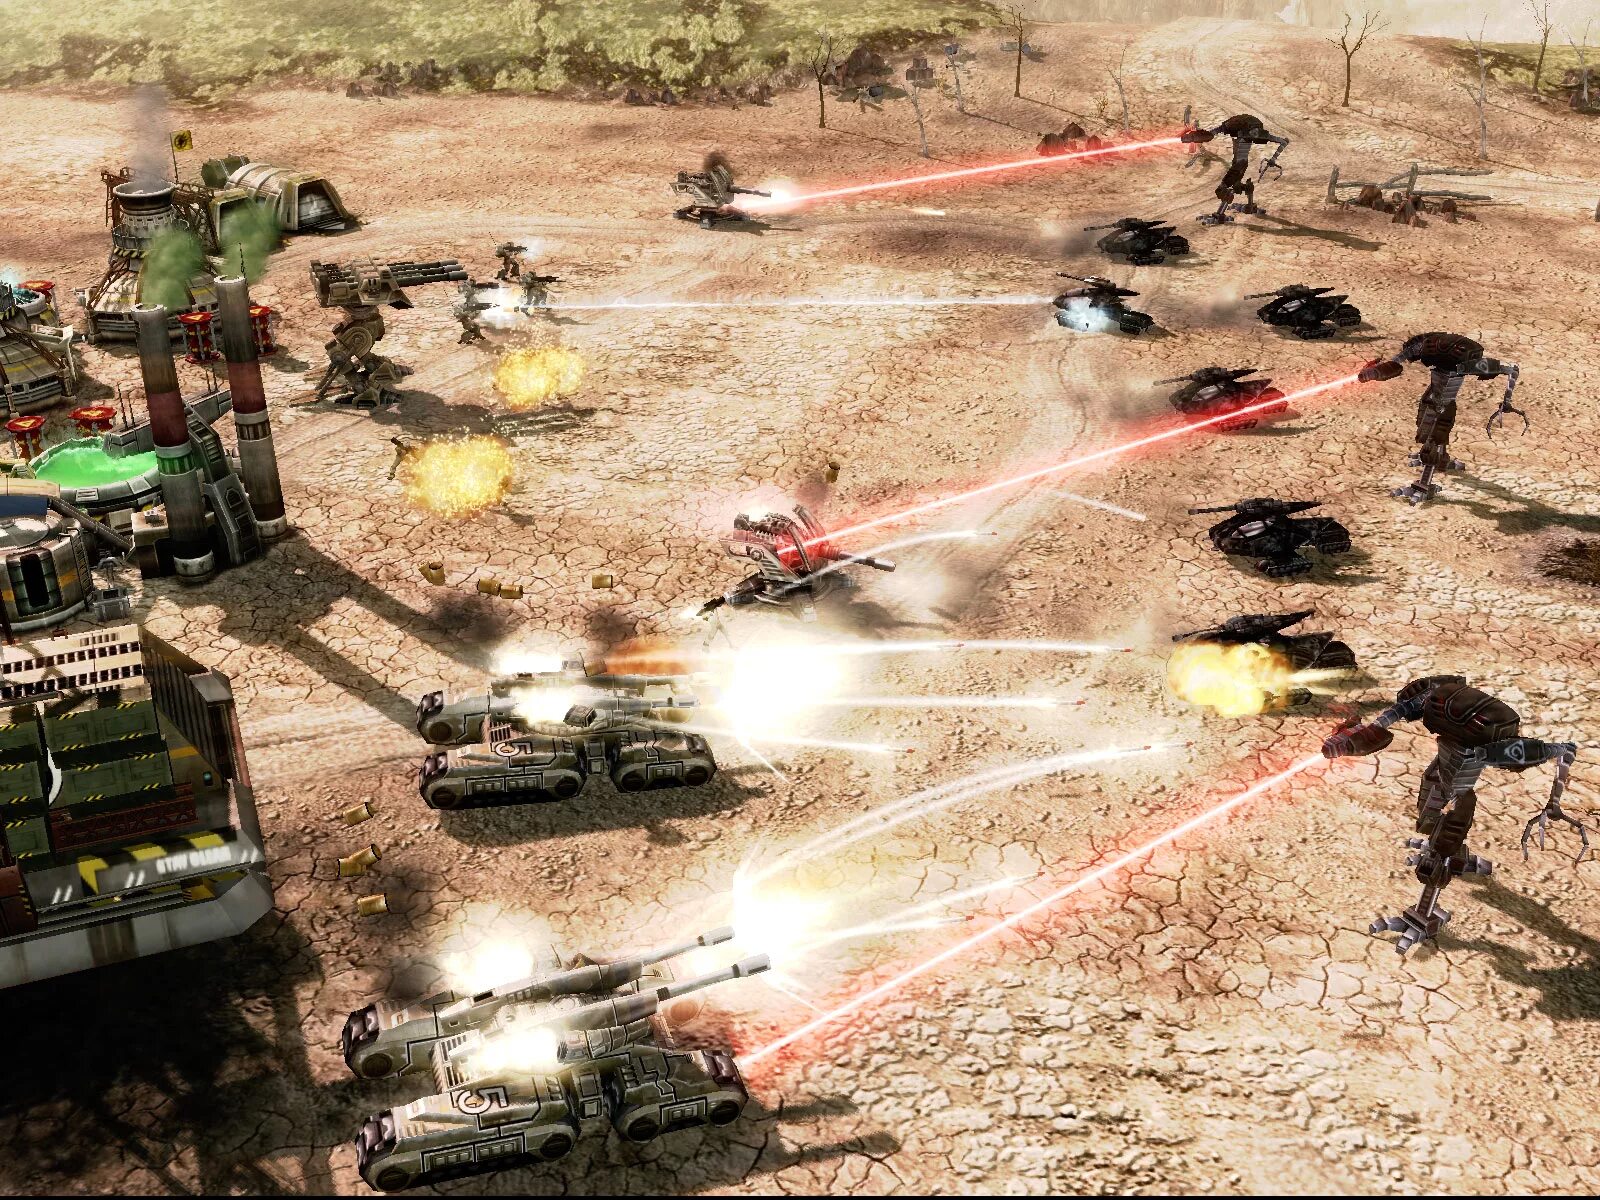 Command conquer на русском. Command & Conquer 3: Tiberium Wars. Command and Conquer Tiberium Wars. CNC 3 Tiberium Wars. Commander Conquer 3 Tiberium Wars.